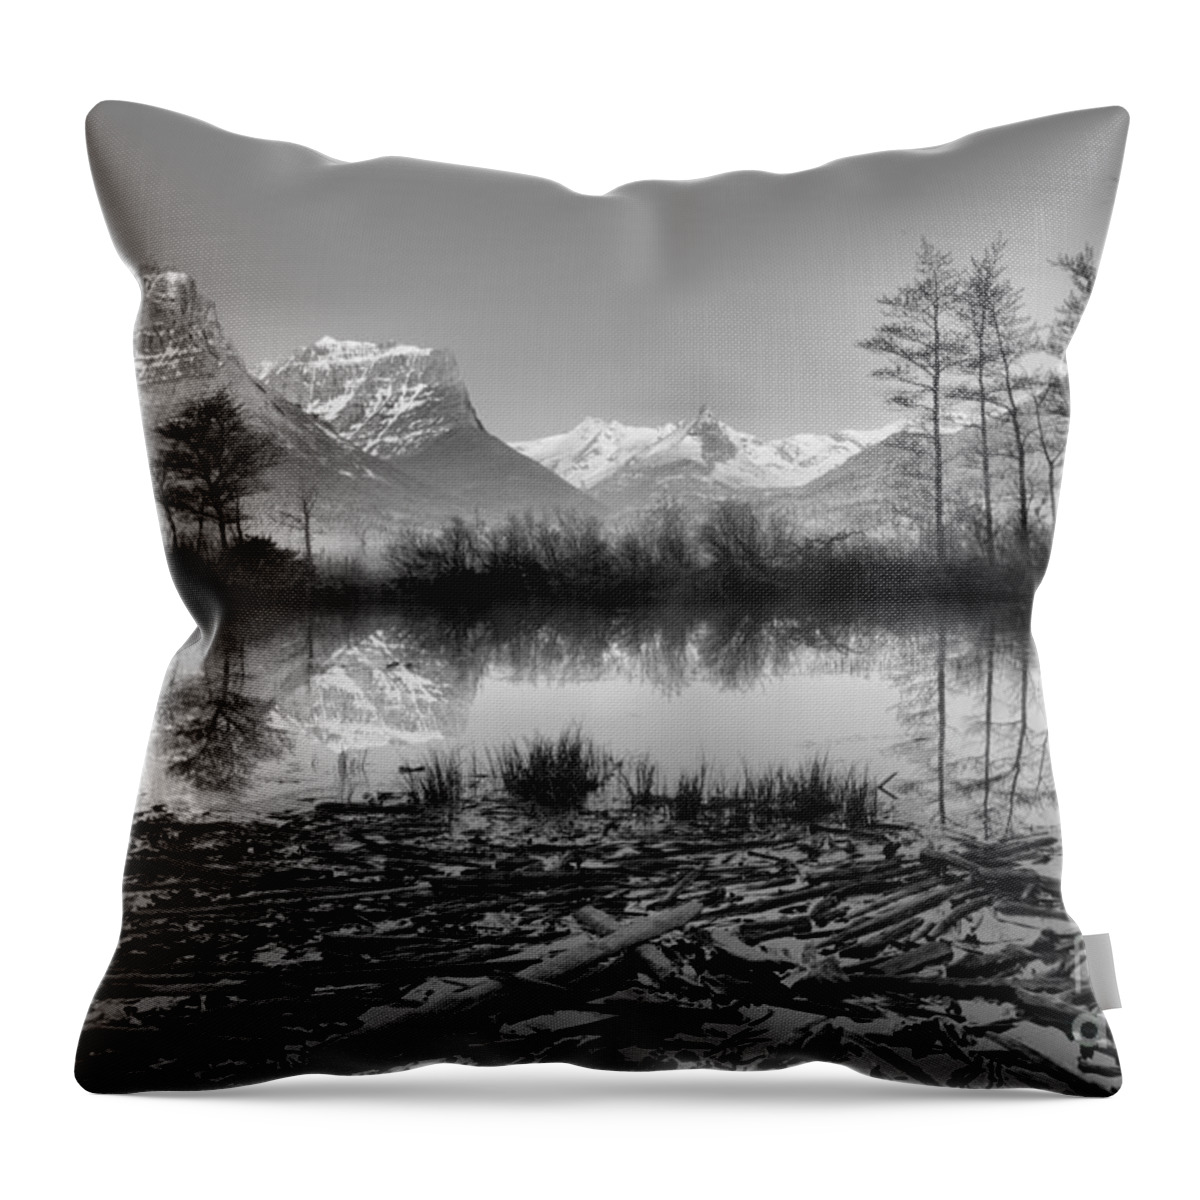 St Mary Throw Pillow featuring the photograph St. Mary Driftwood Pond Reflections Black And White by Adam Jewell